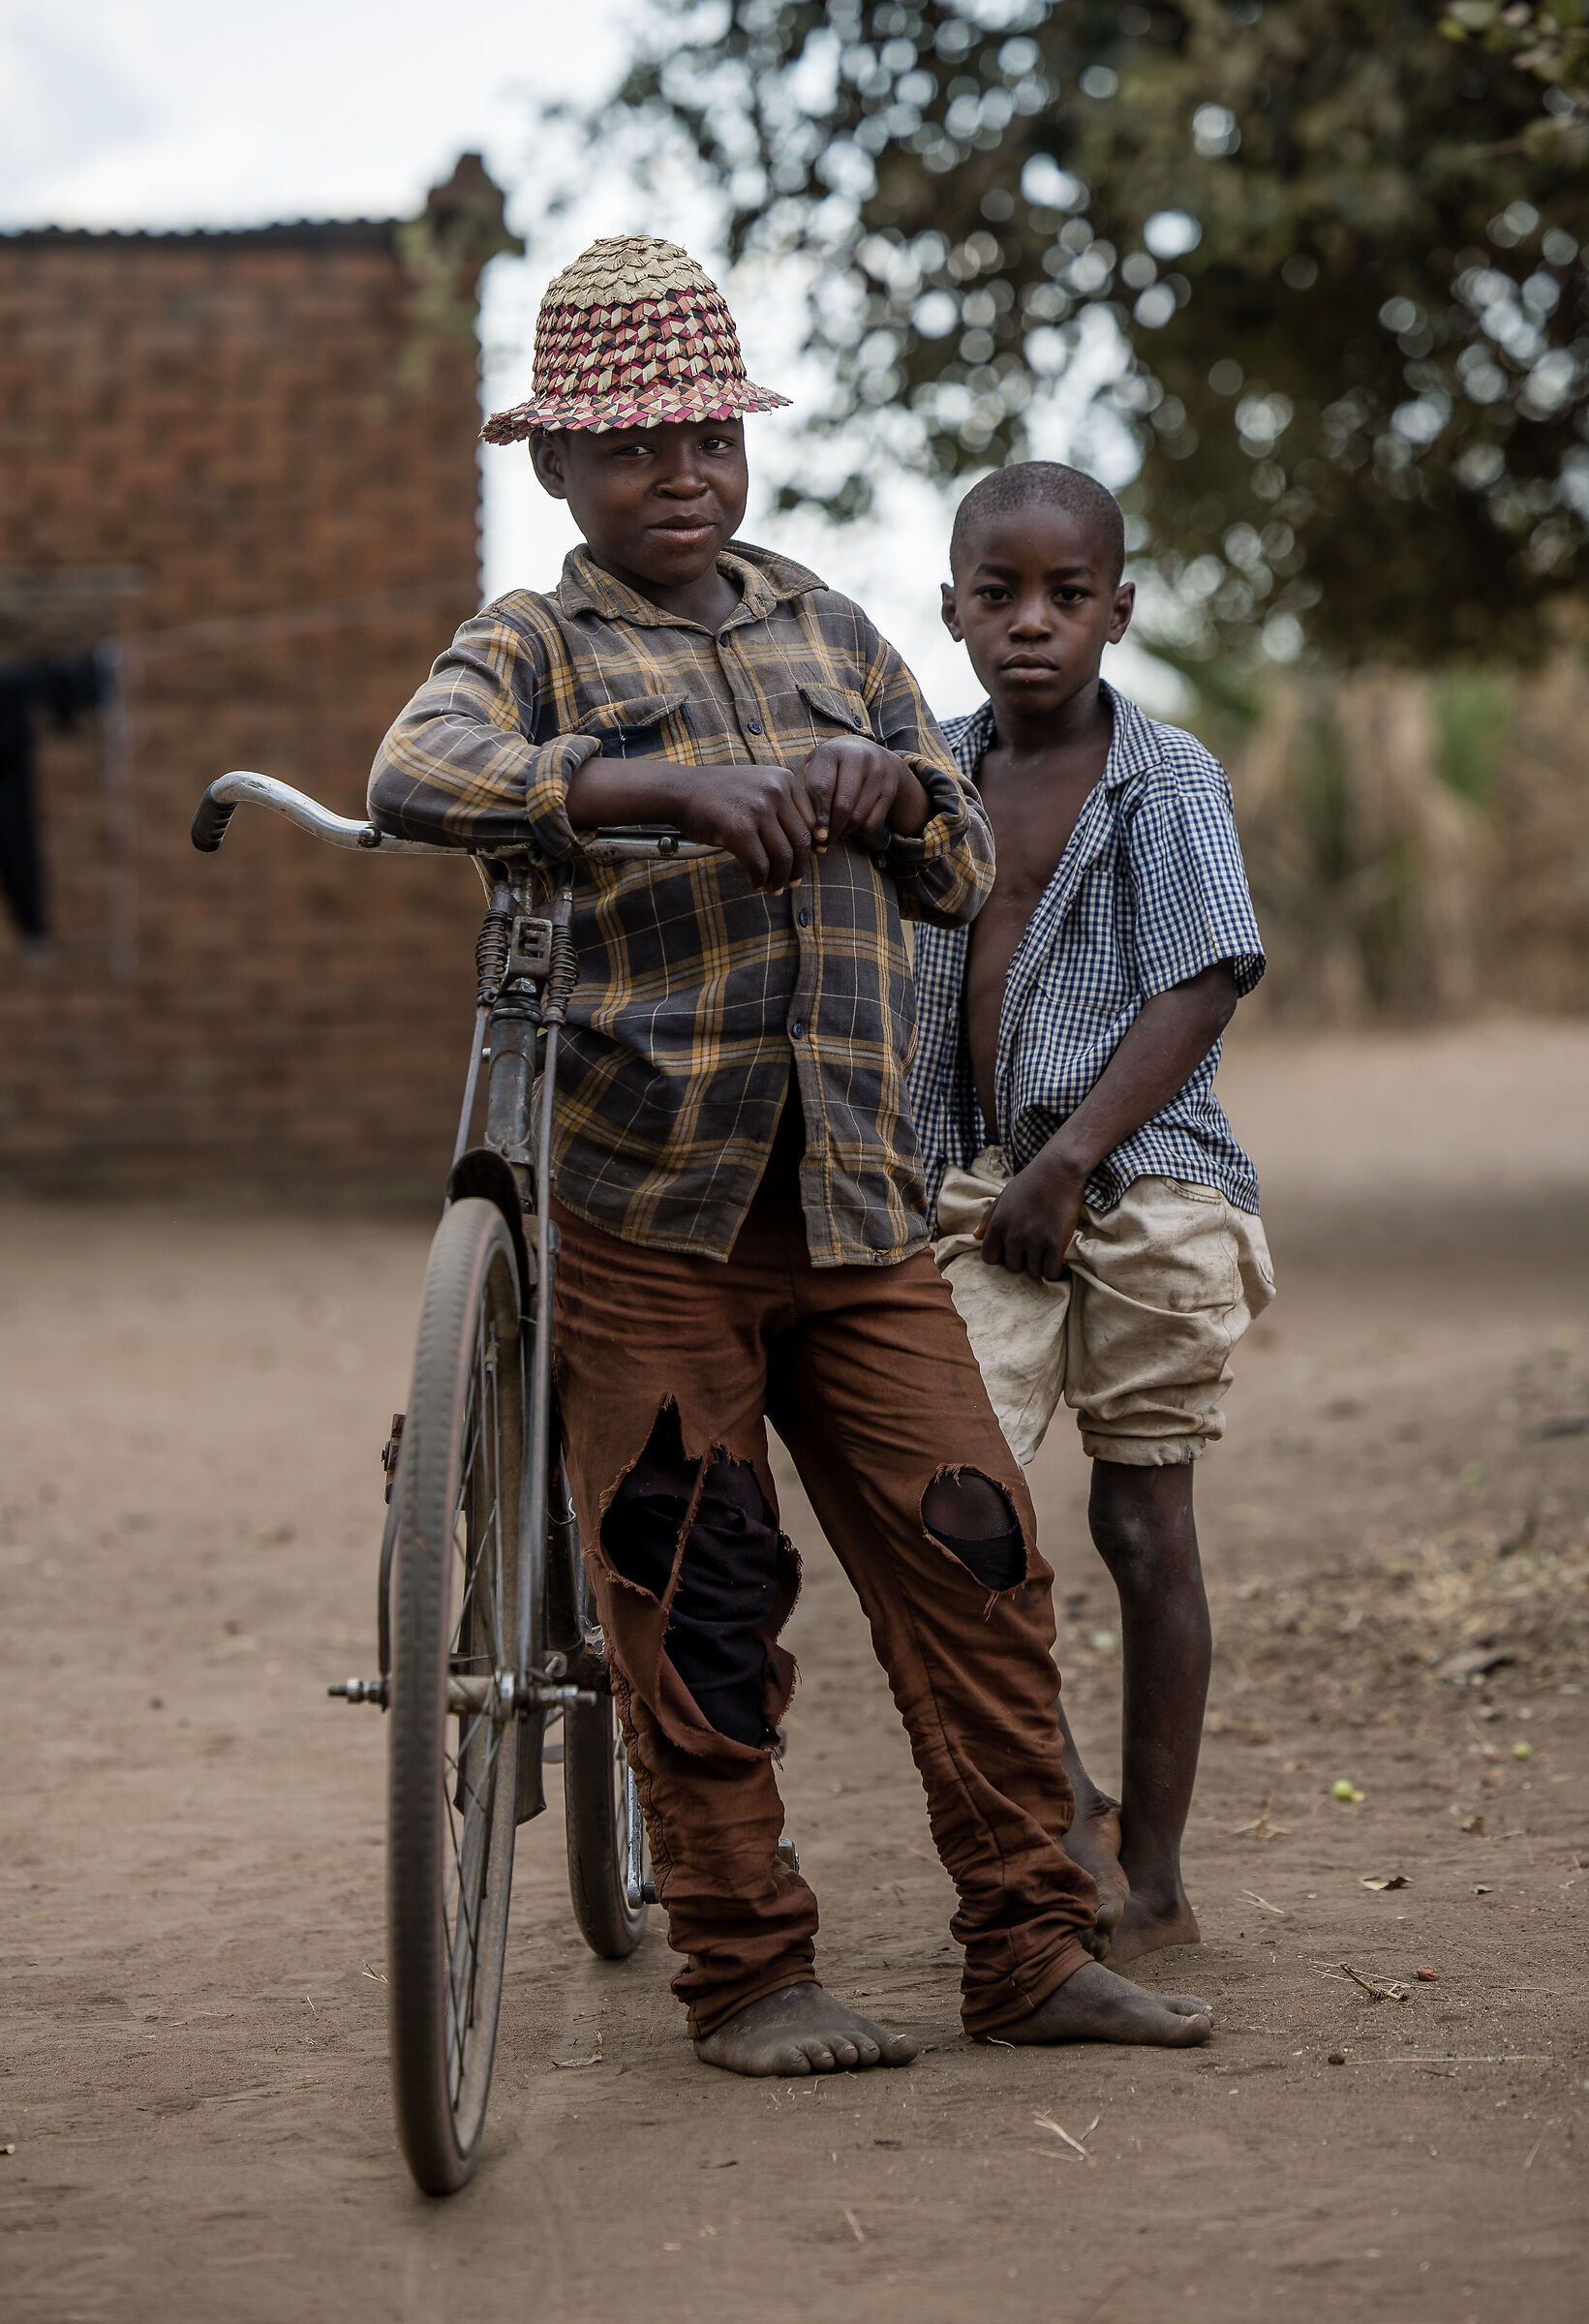 Zambia, little cyclists grow up...